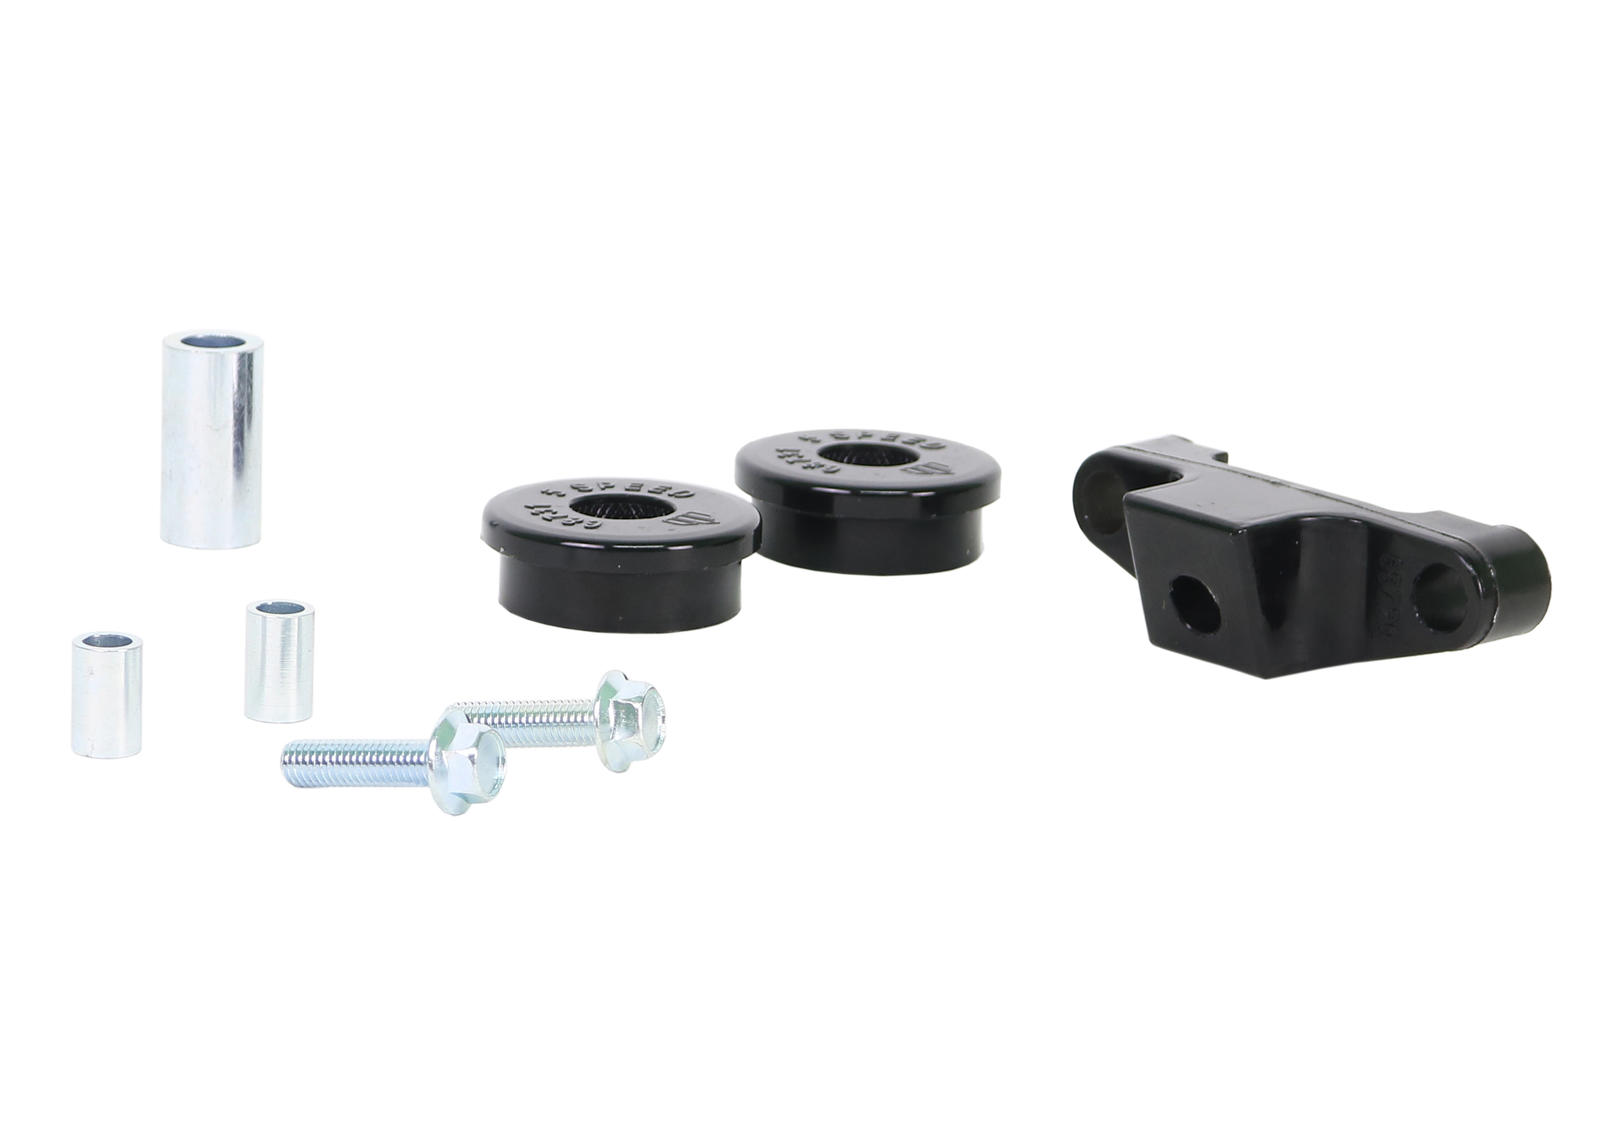 Front Gearbox Linkage Selector - Bushing Kit to Suit Subaru Forester, Impreza, Liberty, Outback and XV